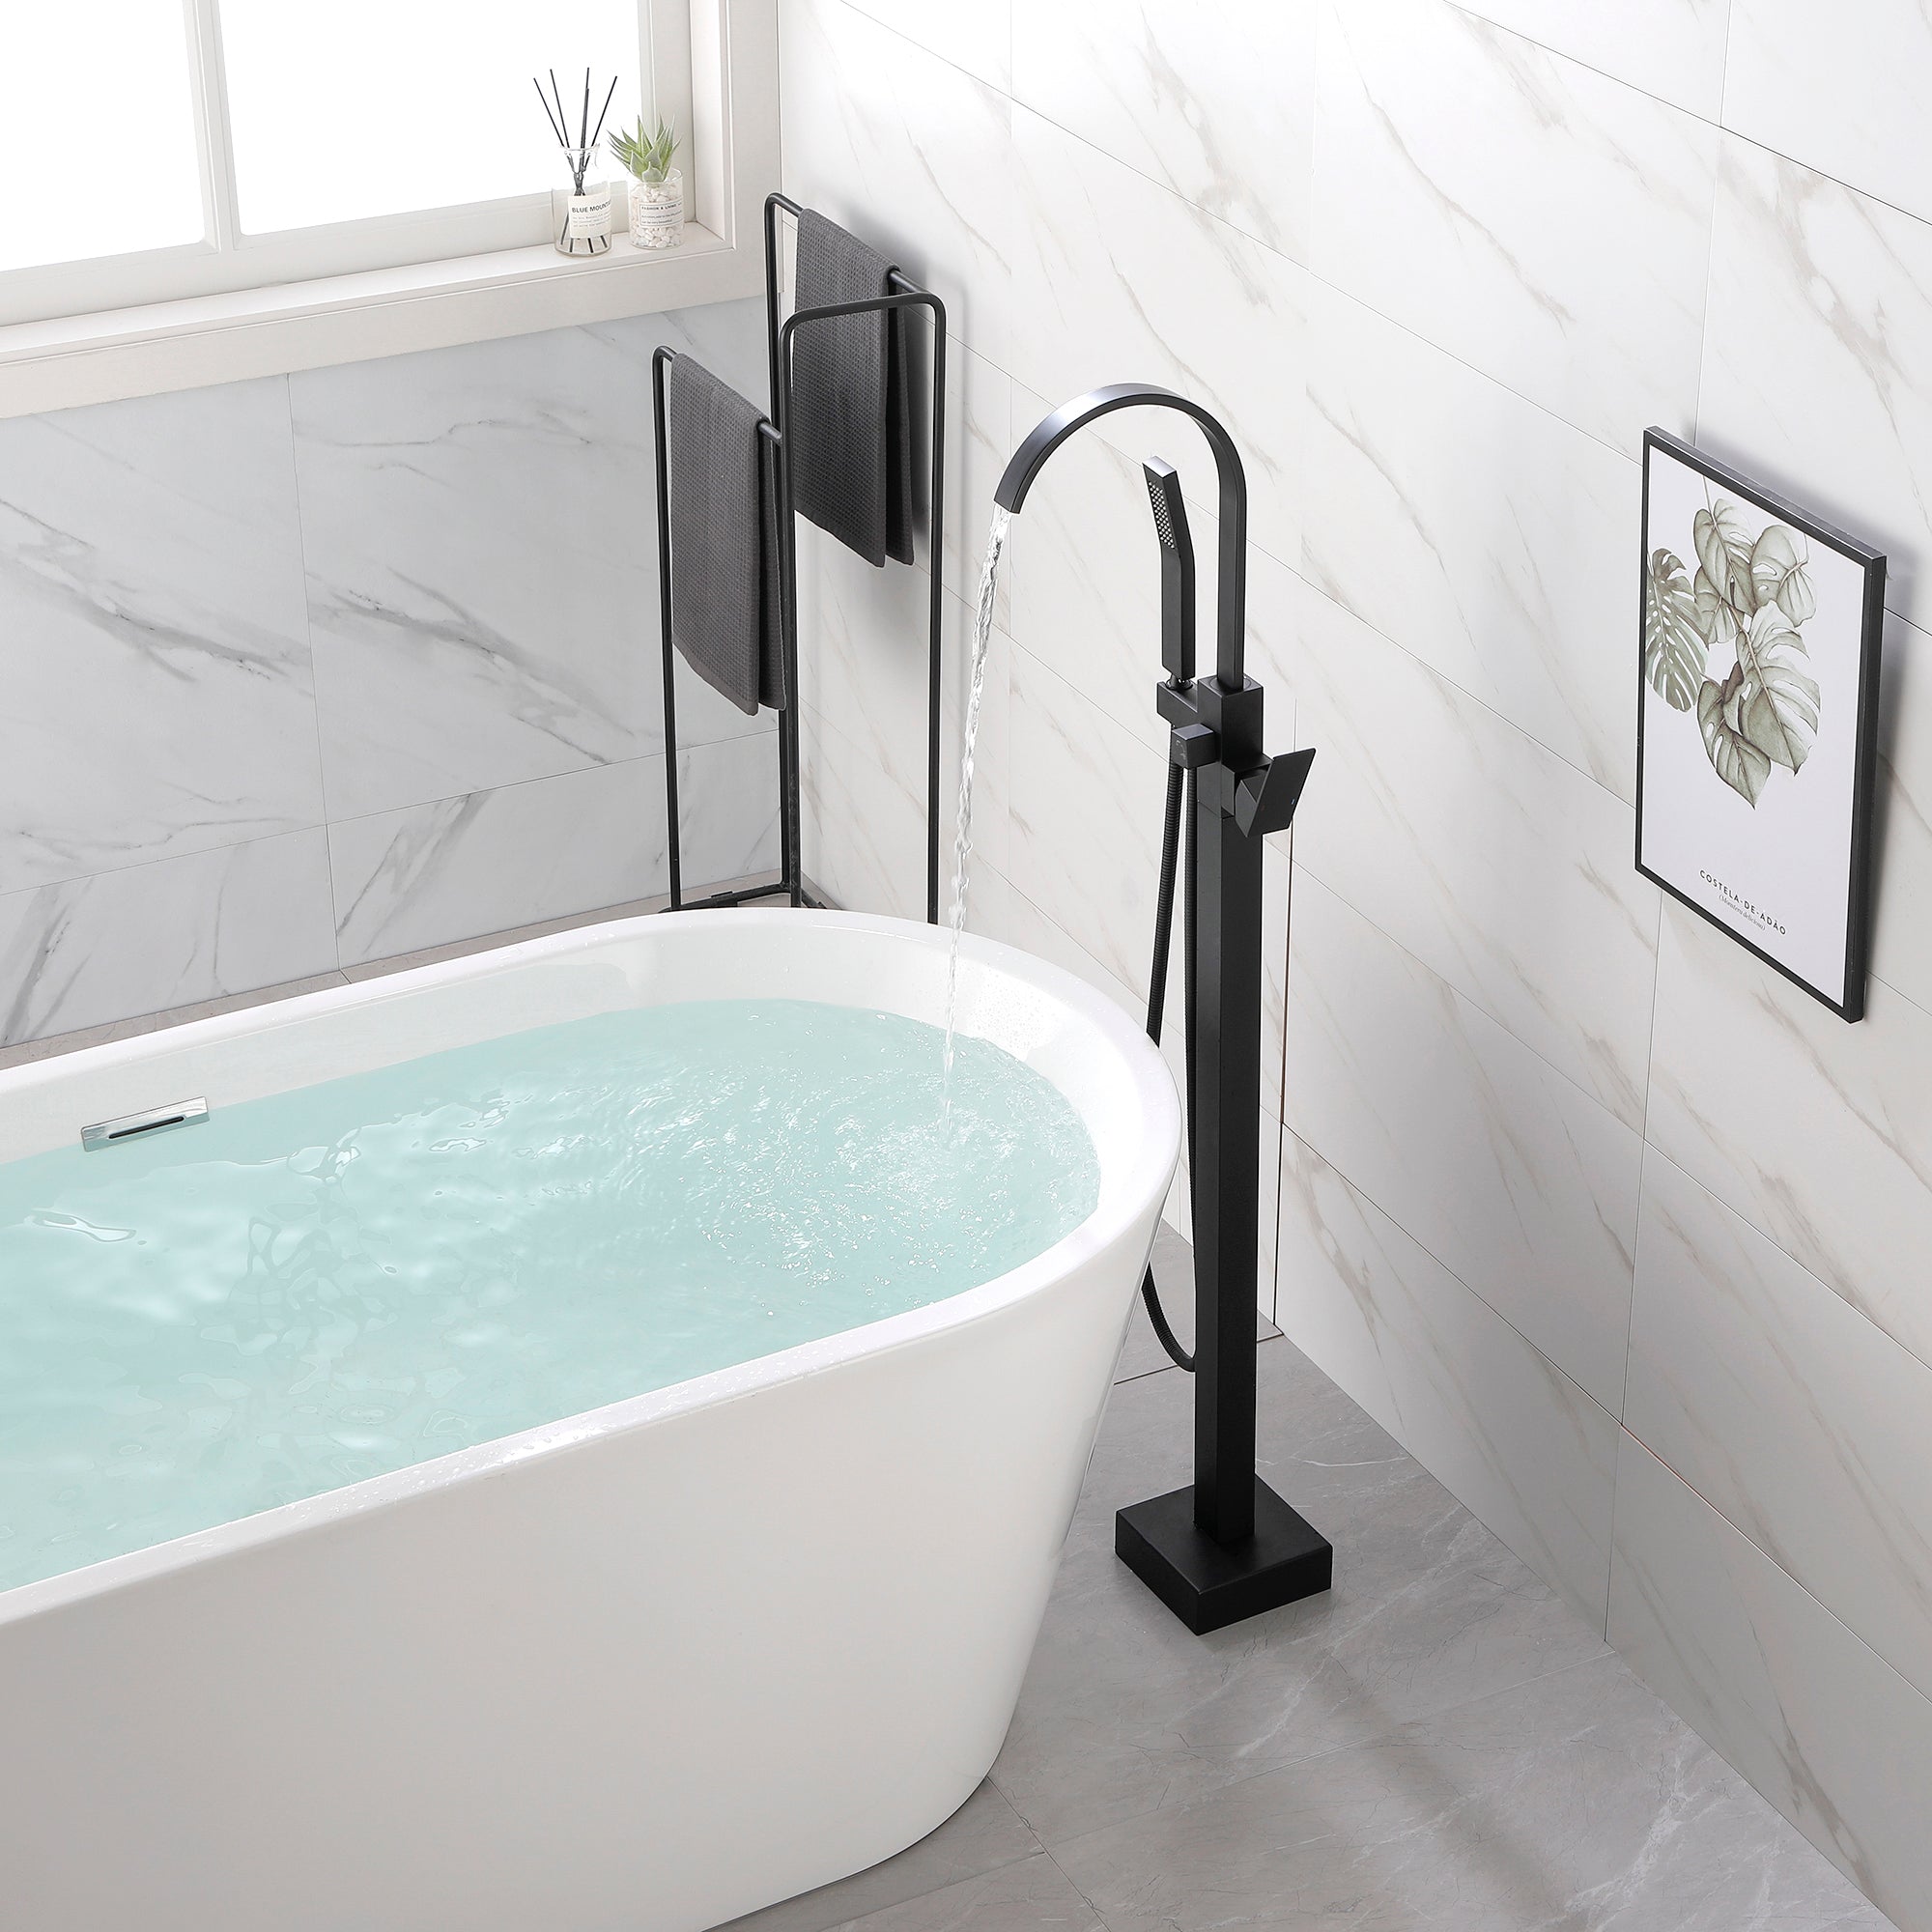 ZNTS Single Handle Floor Mounted Clawfoot Tub Faucet with Hand shower NK0860